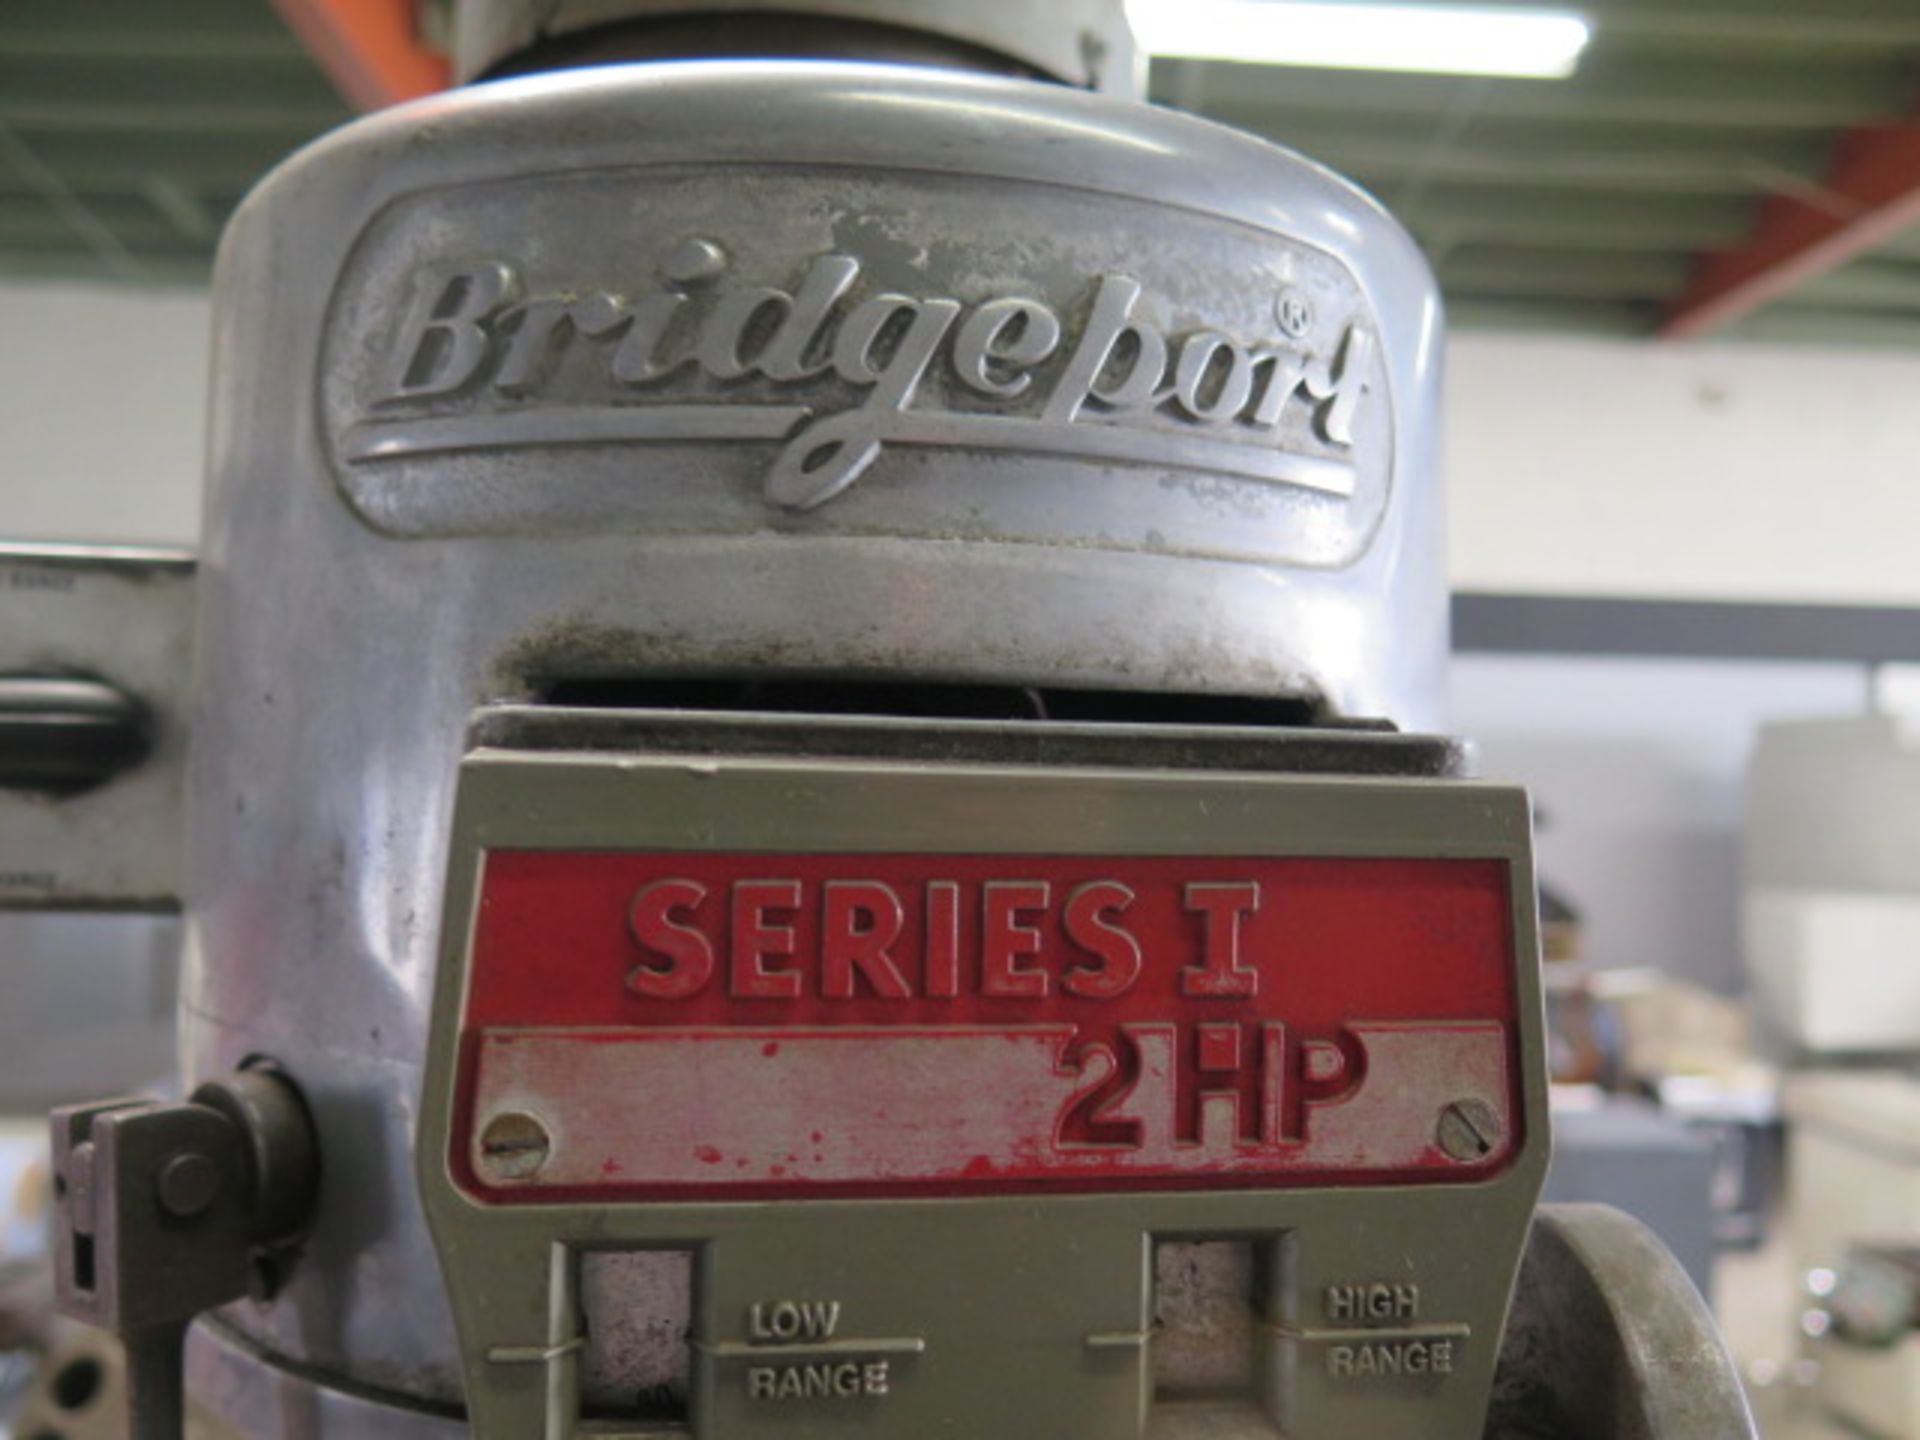 Bridgeport Serries 1 – 2Hp Vertical Mill w/ 60-4200 RPM, Chrome Ways, 9” x 42” Table, SOLD AS IS - Image 3 of 10